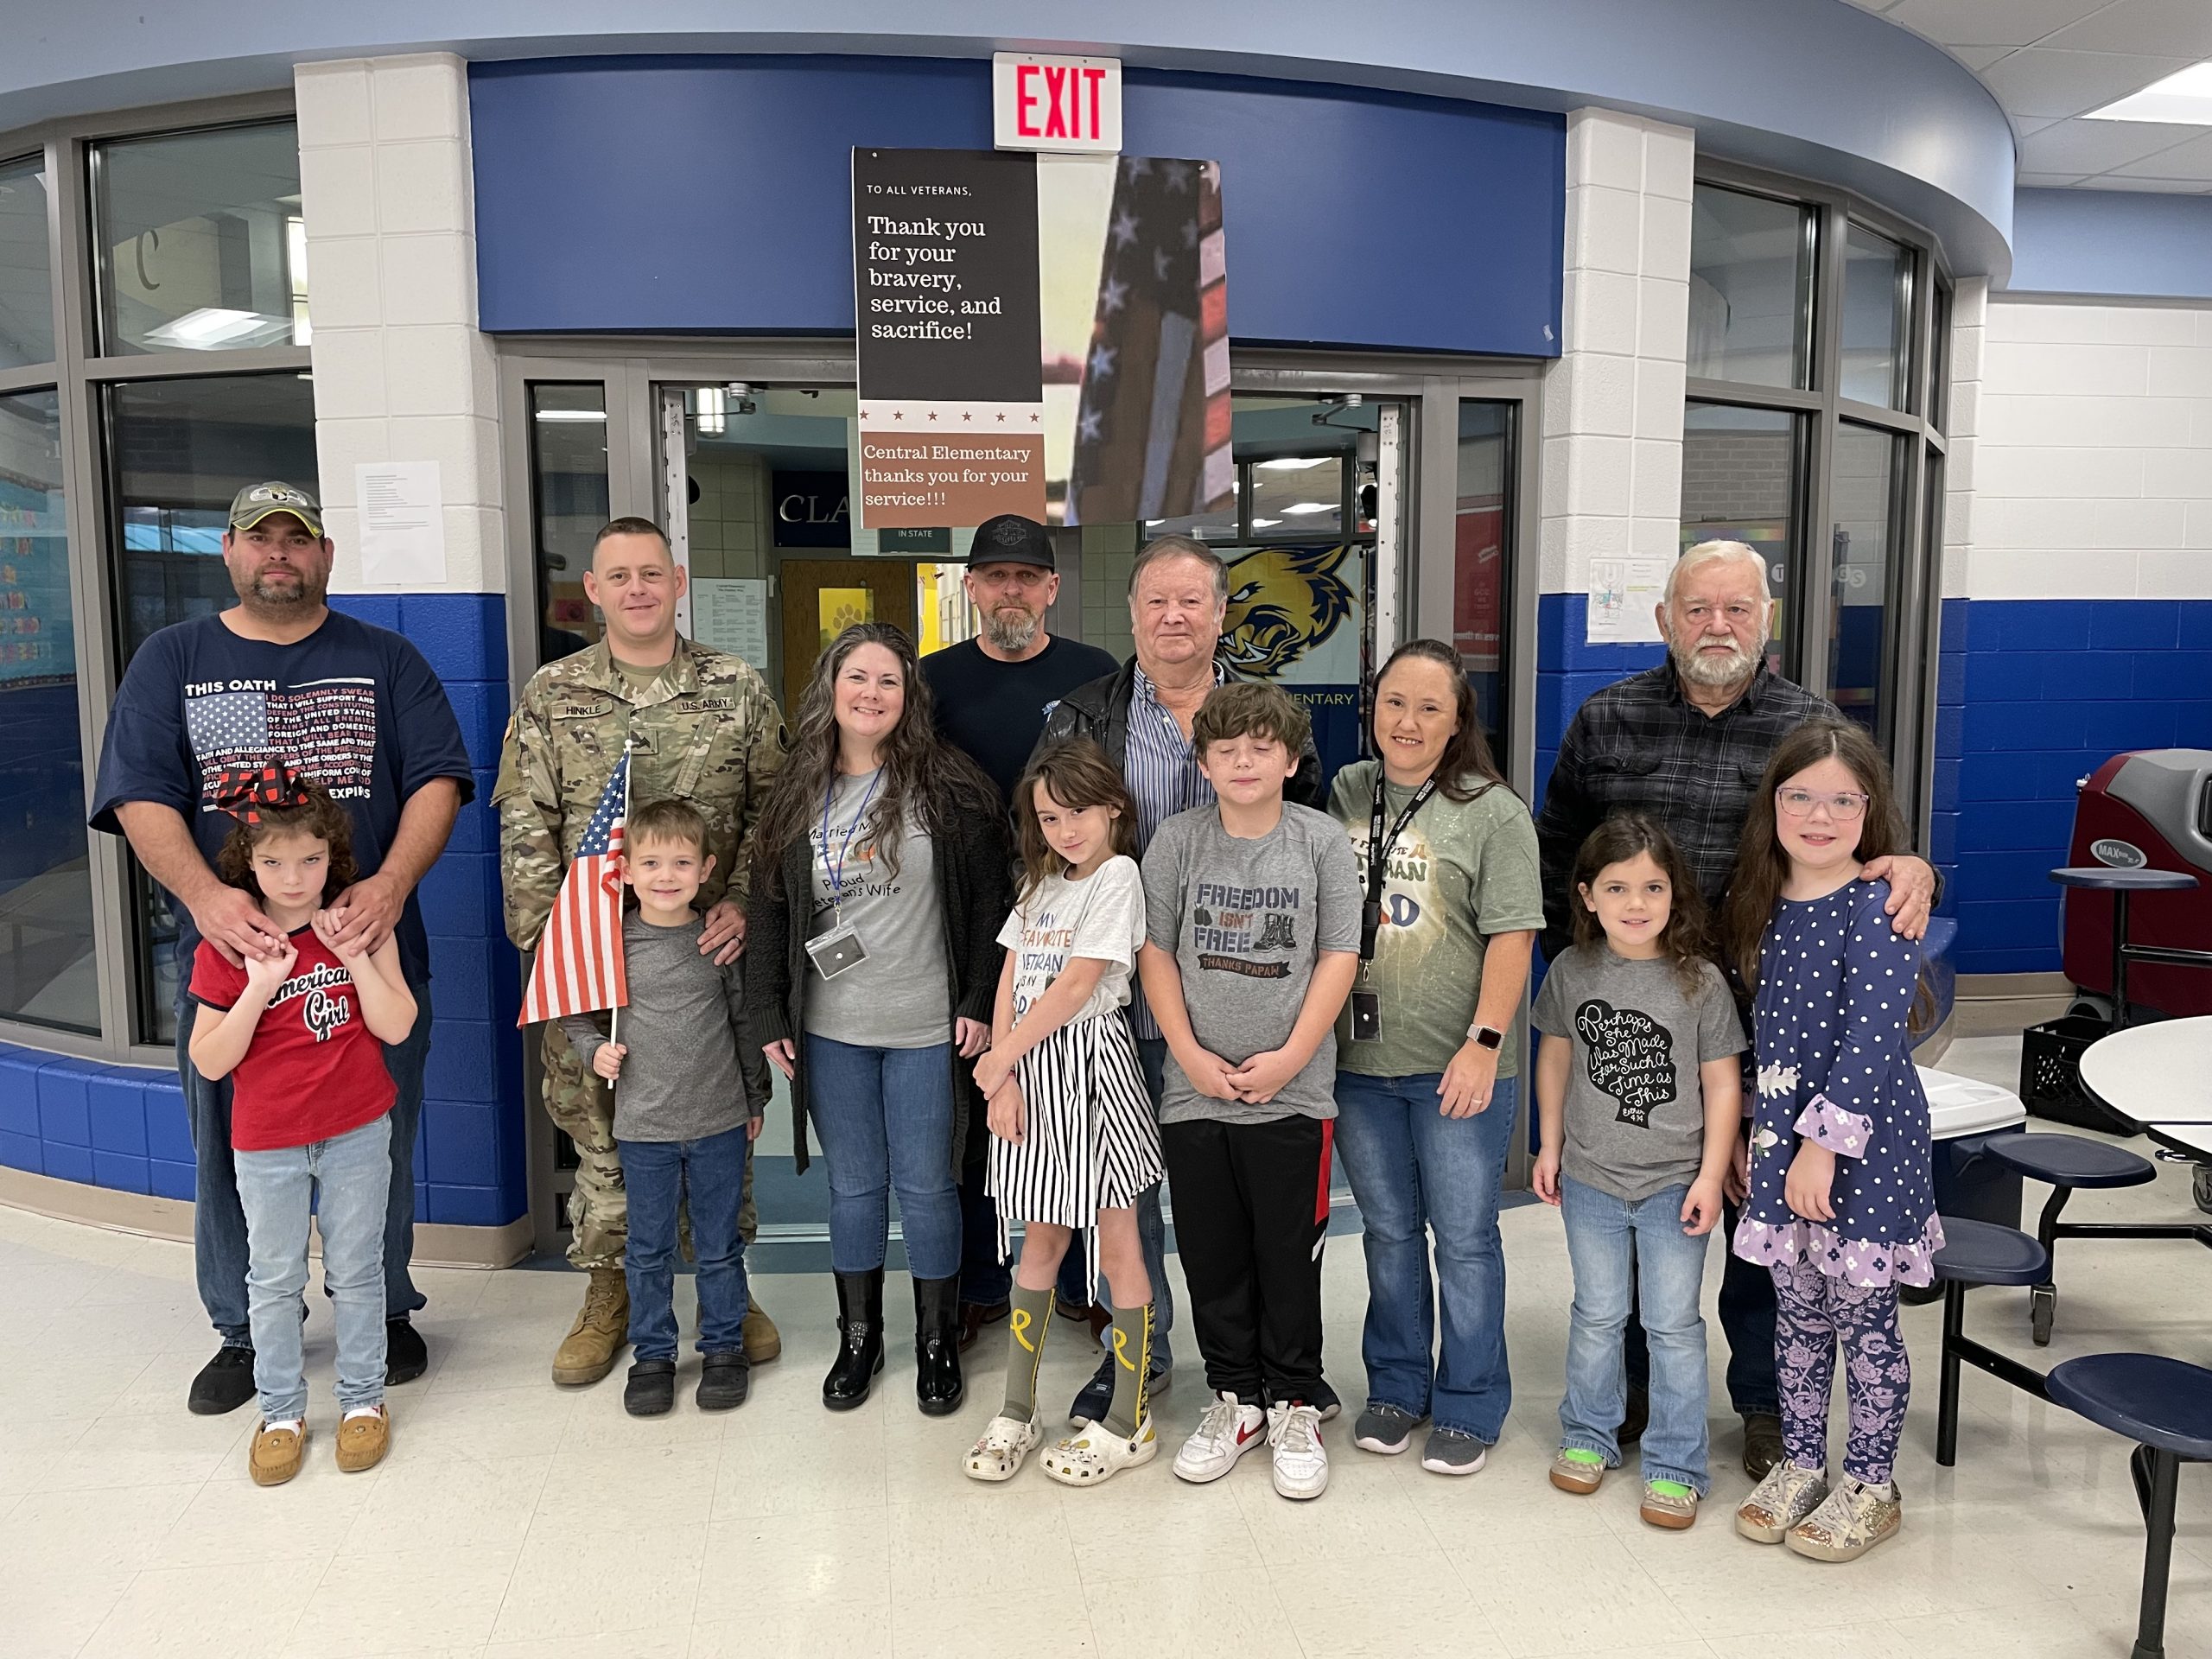 Veterans are shown with family at Central Elementary